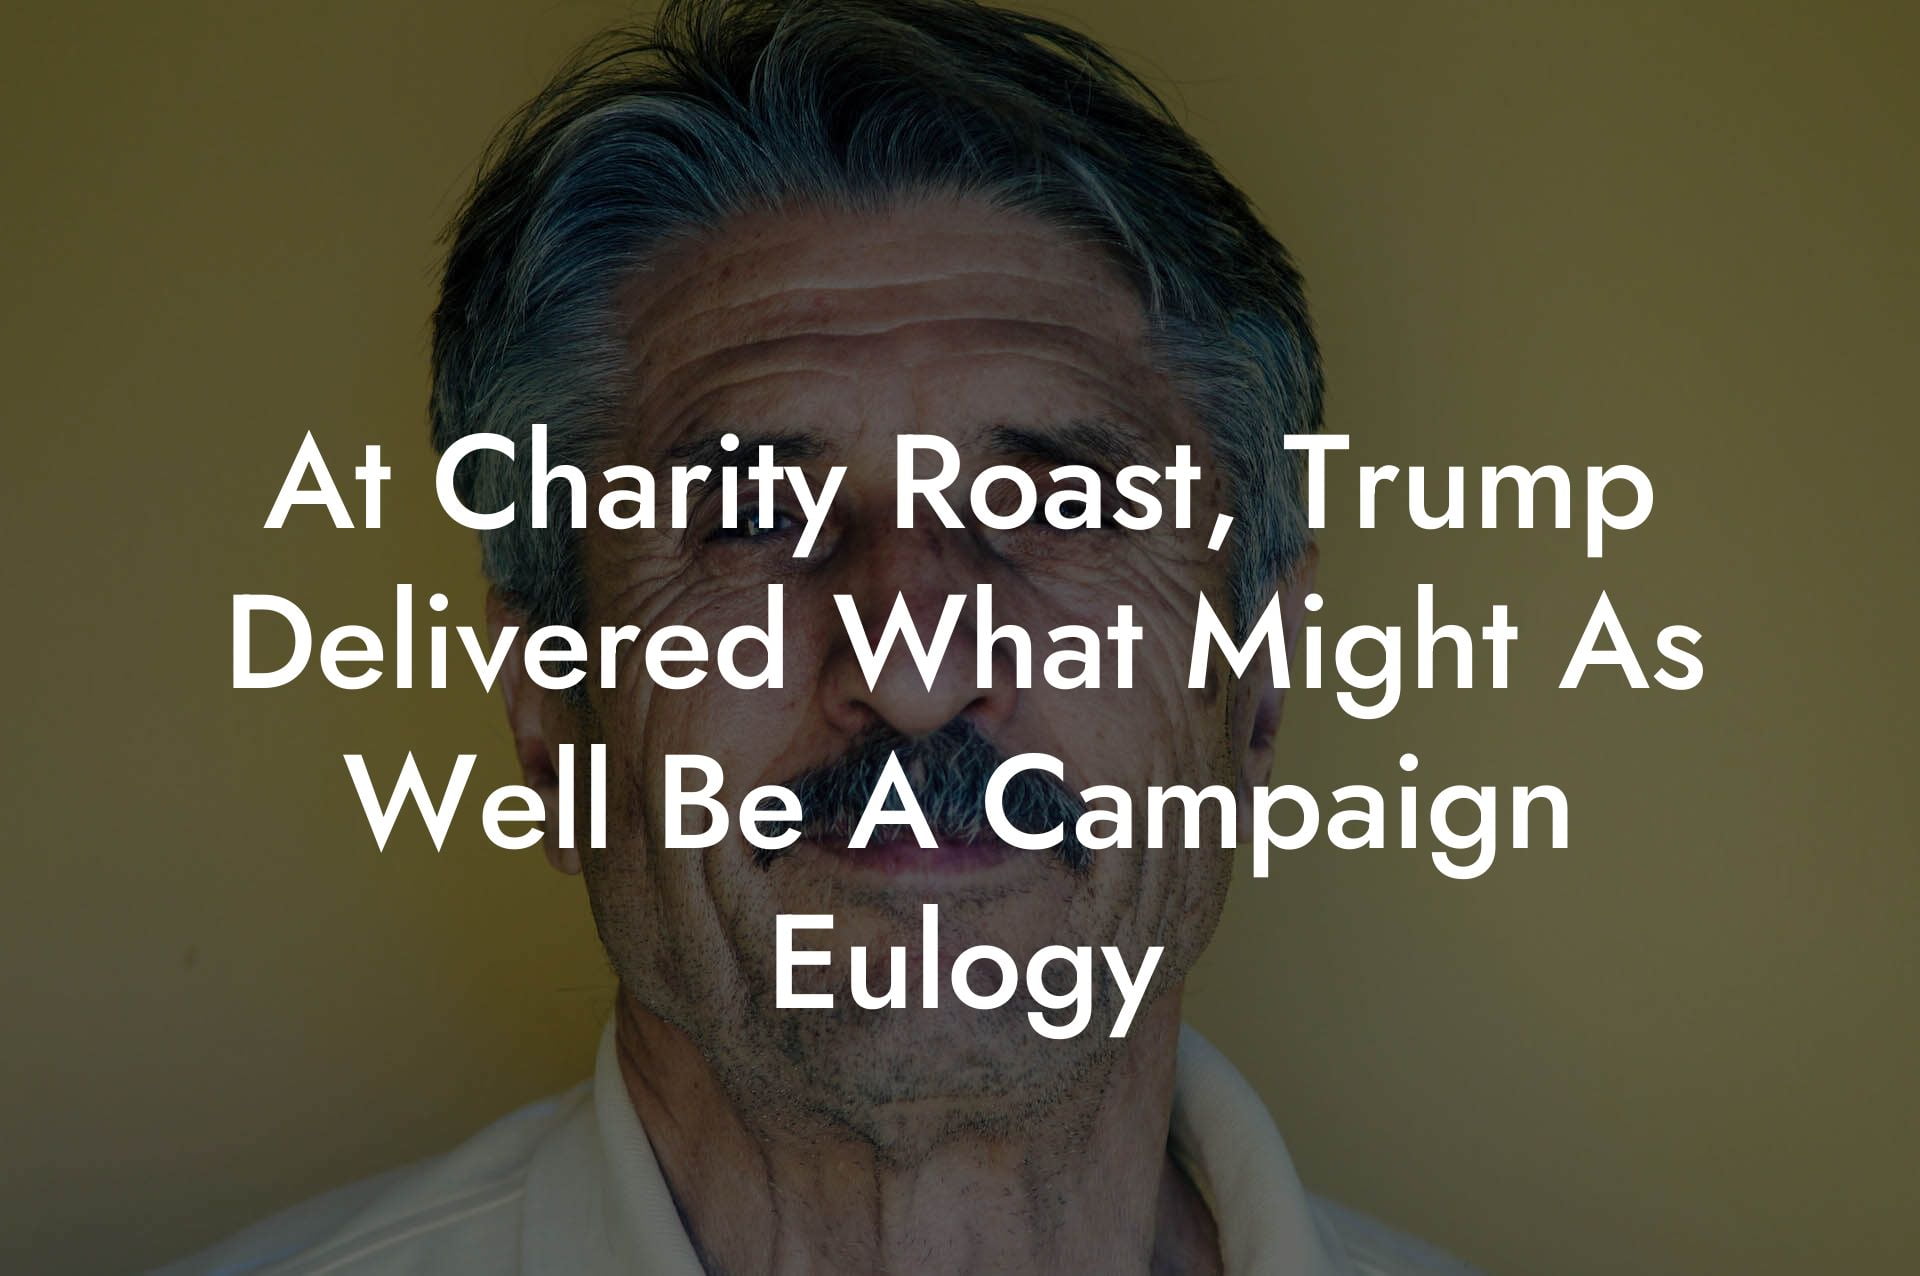 At Charity Roast, Trump Delivered What Might As Well Be A Campaign Eulogy